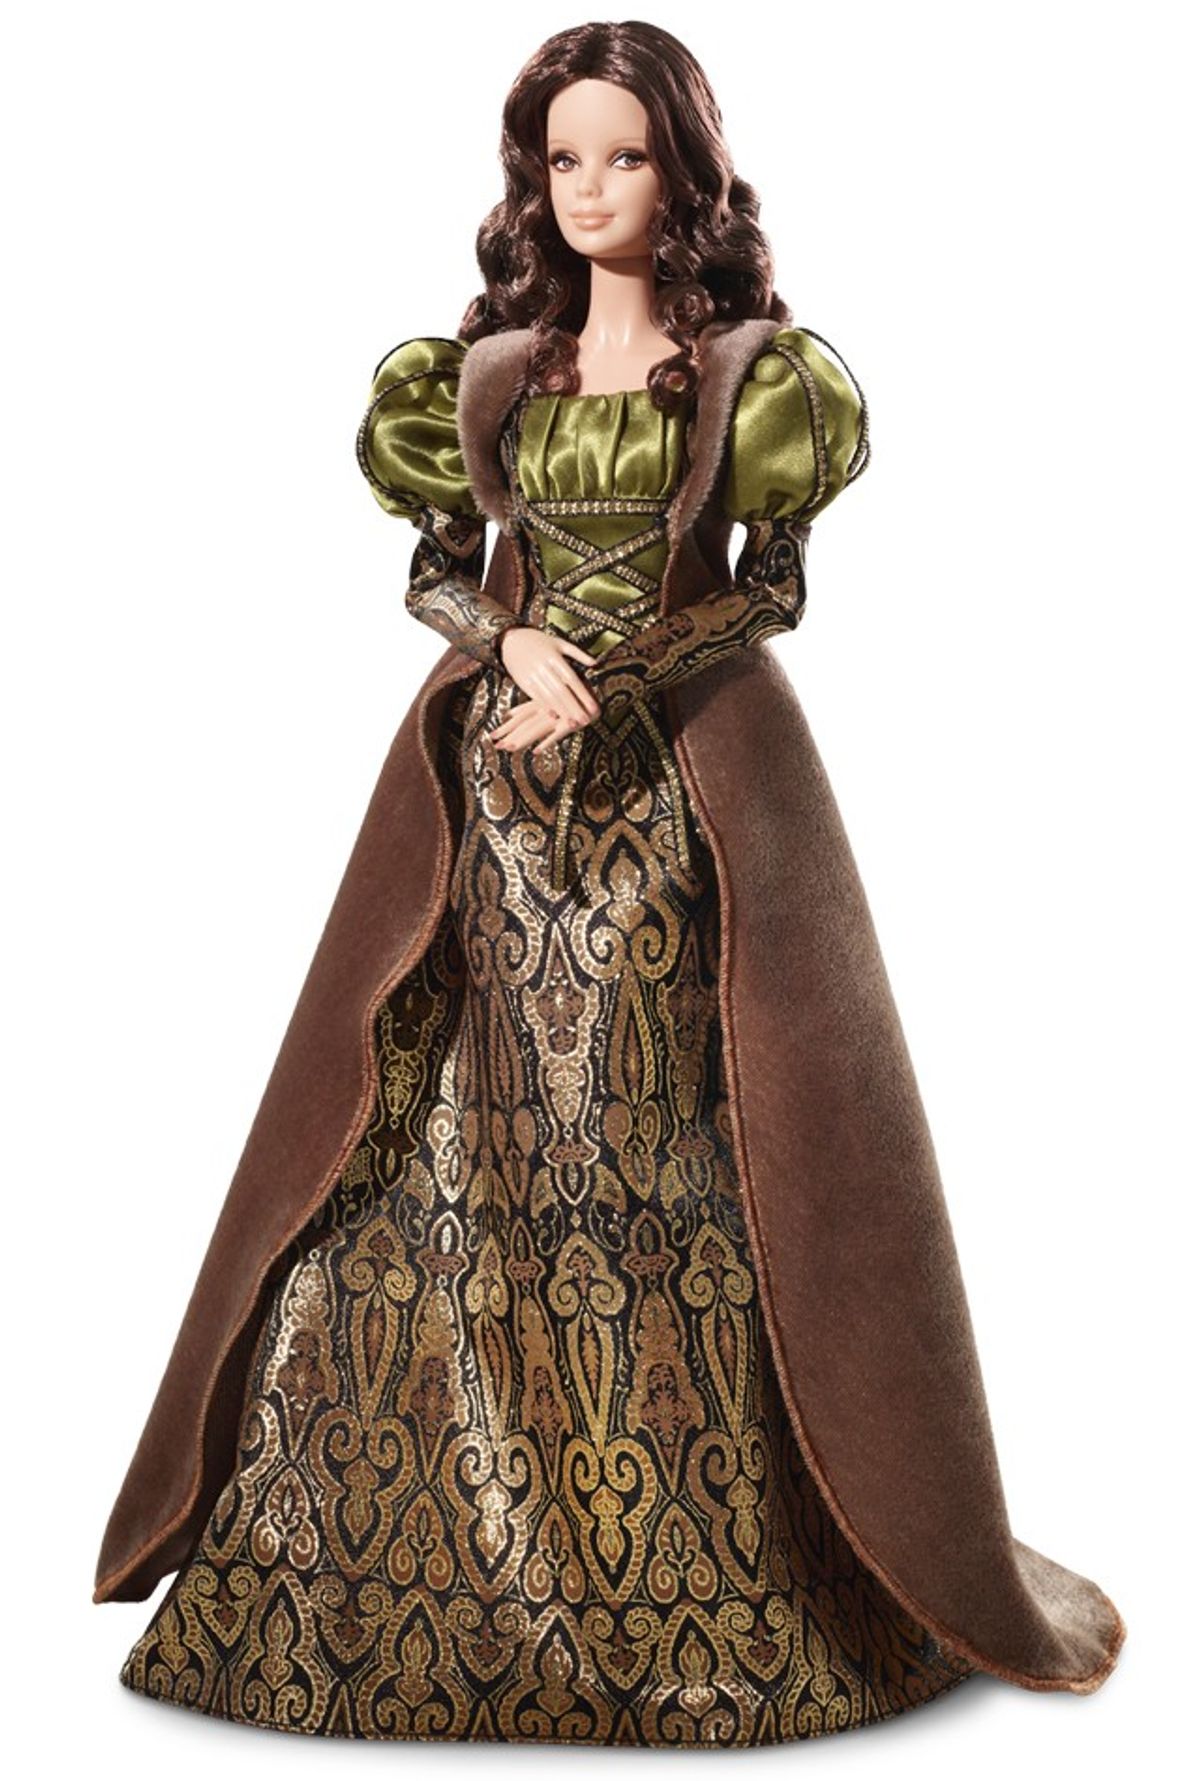 The Mona Lisa doll from Barbie's "Museum Collection."    